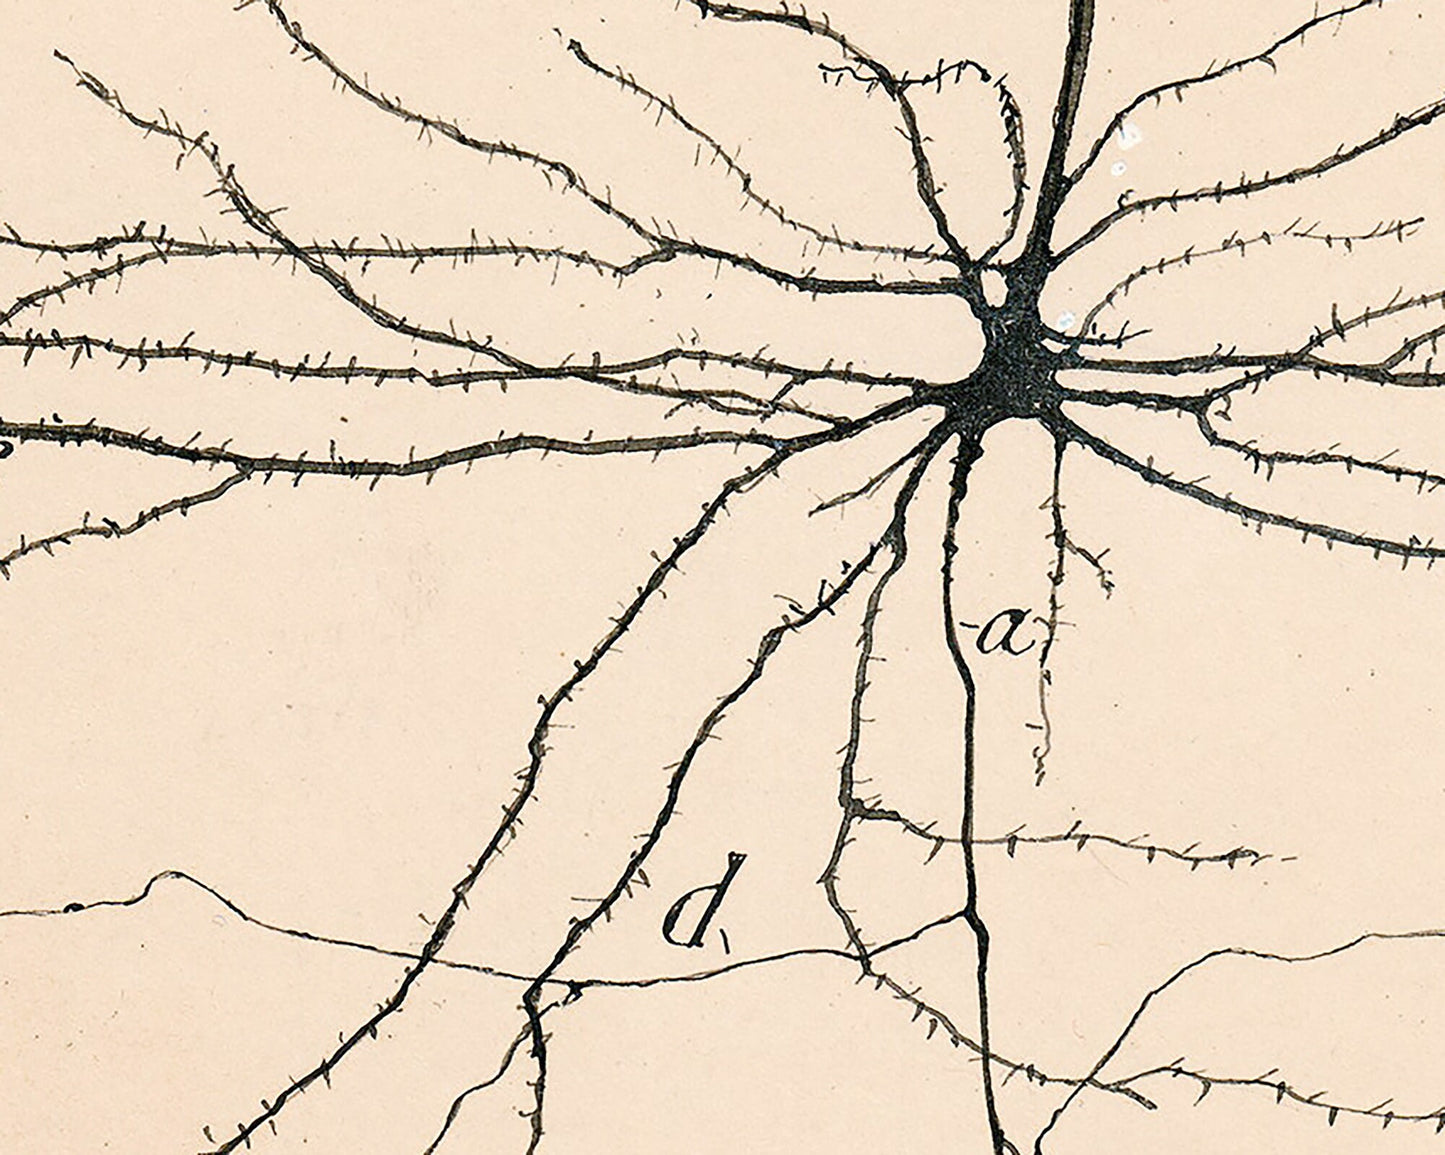 Vintage neuron drawing No. 2 | Santiago Ramón y Cajal  | Antique anatomical illustration | Neuroscience and Biology art | Abstract wall art